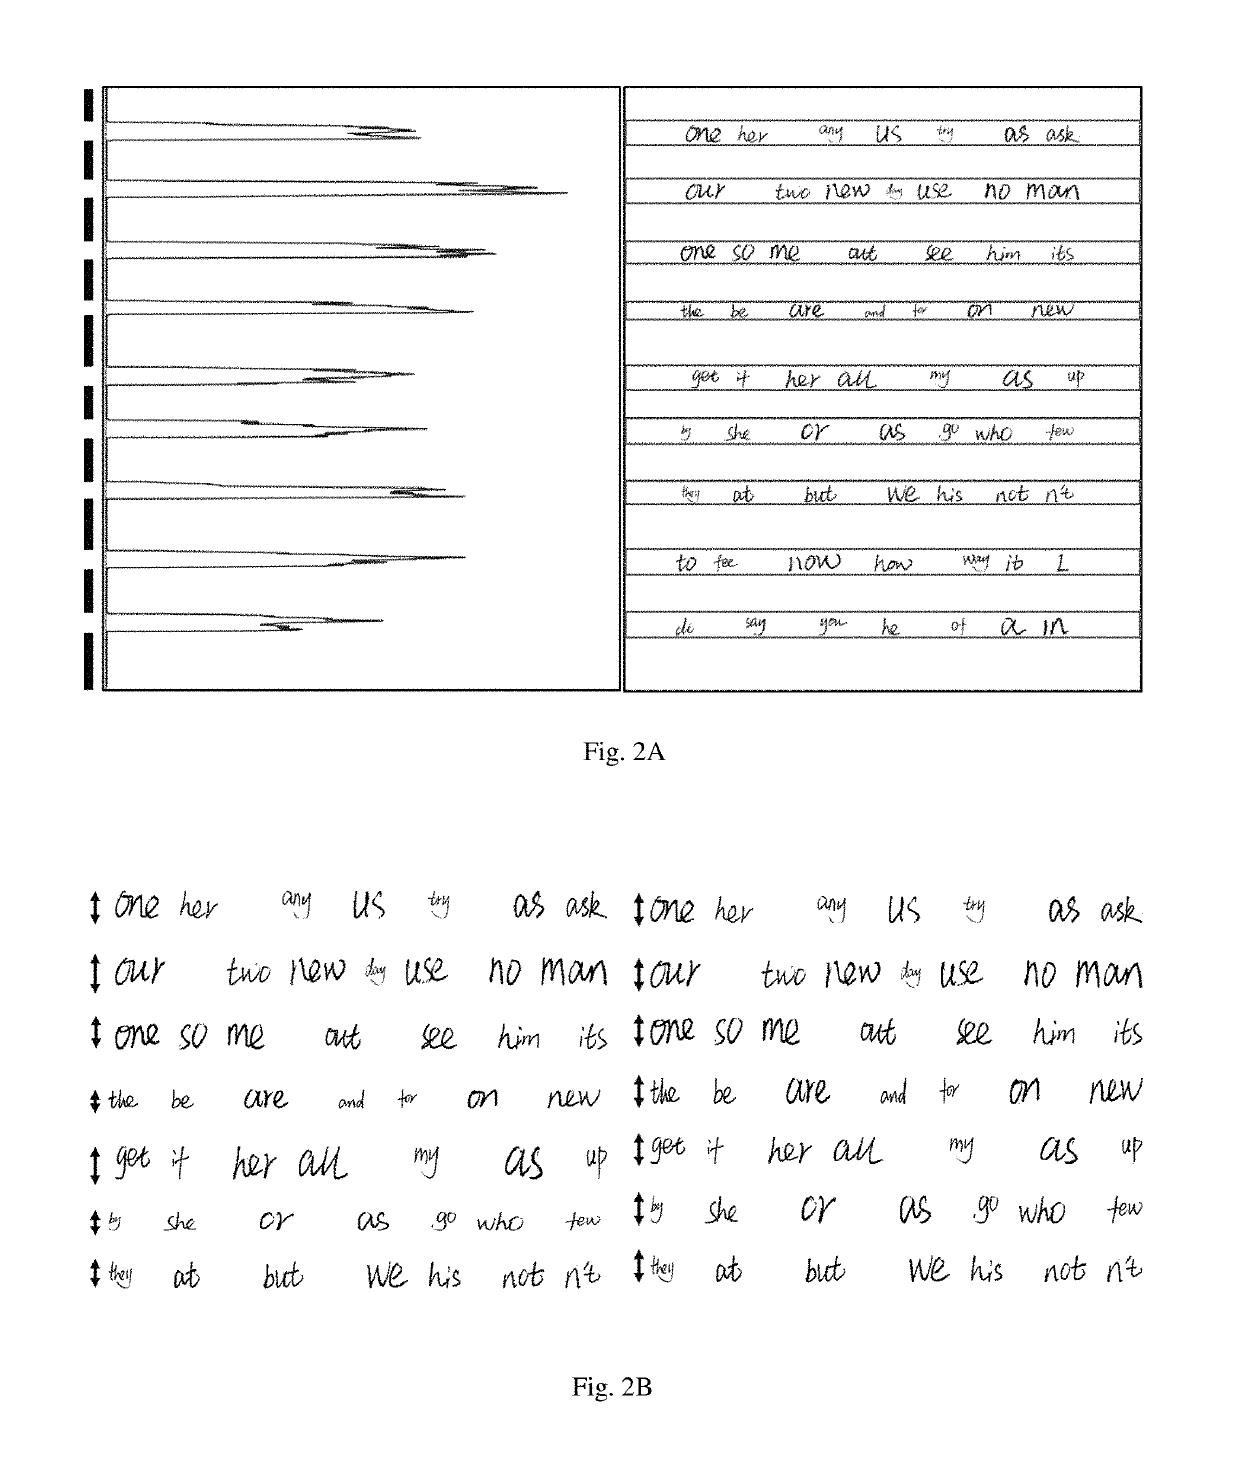 Text image processing using word spacing equalization for ICR system employing artificial neural network